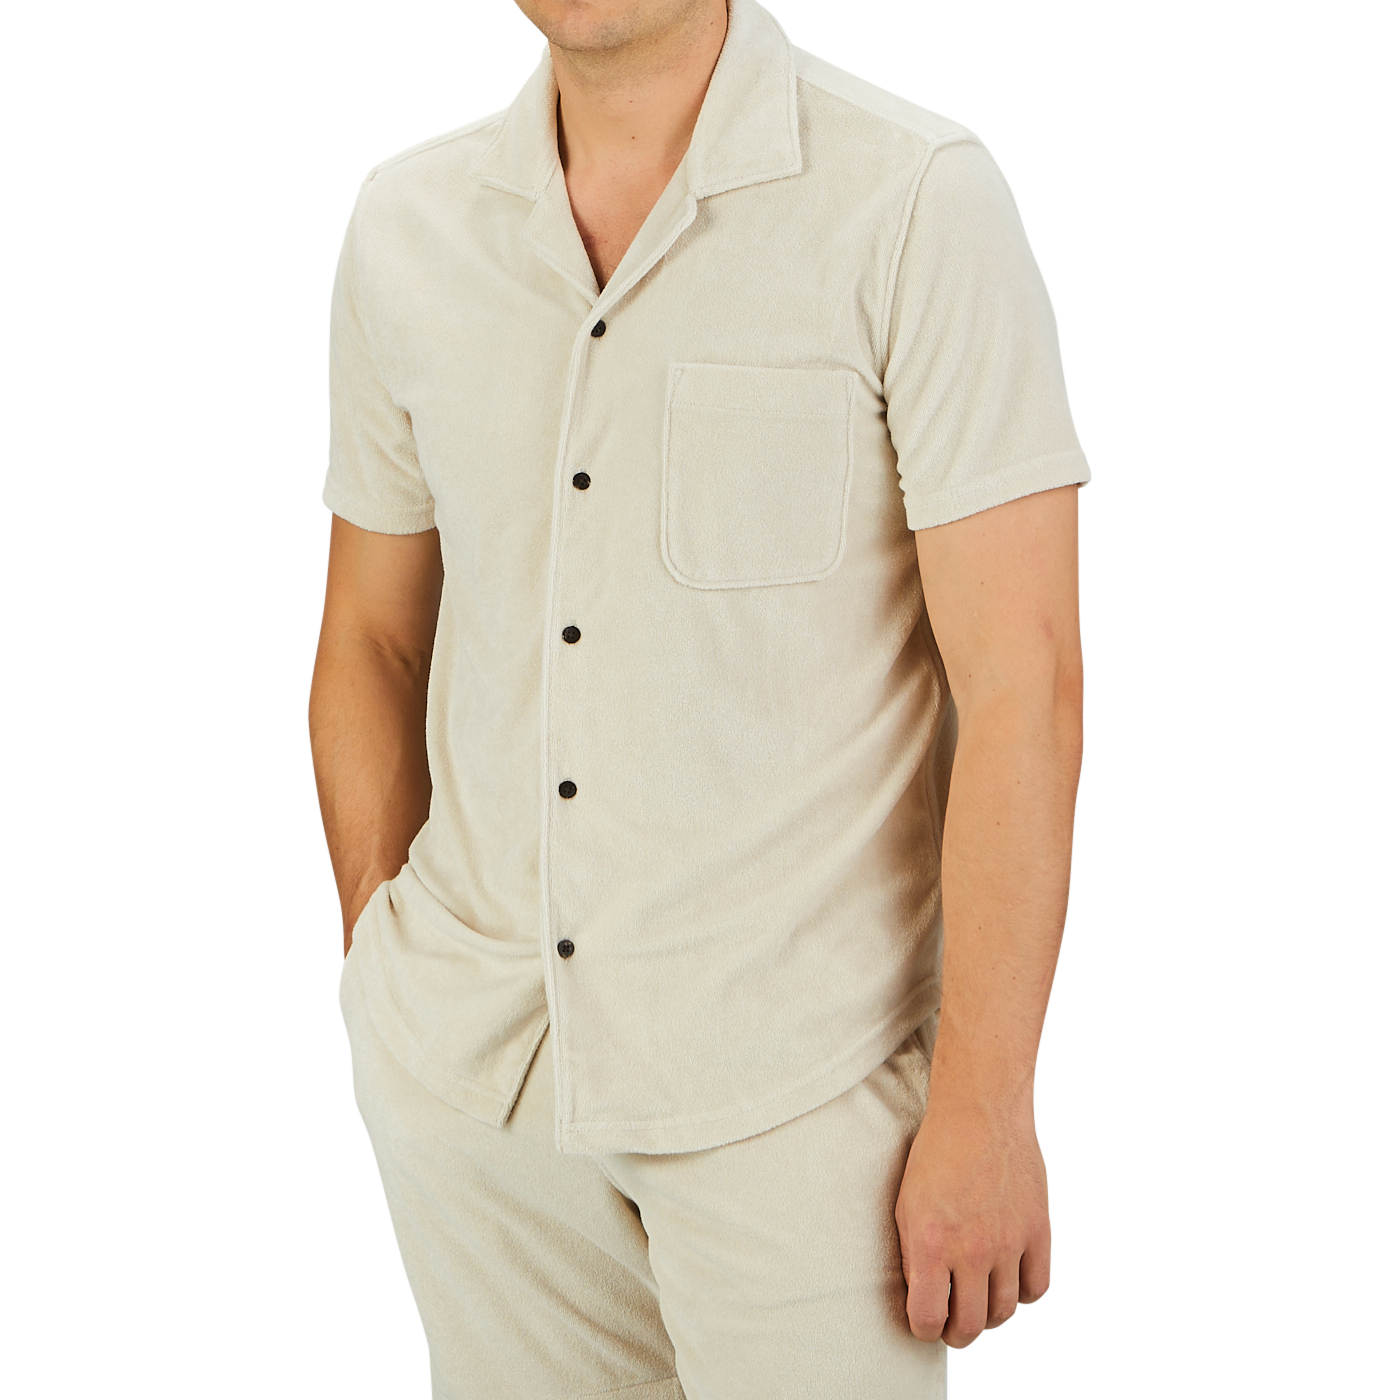 A person wearing a Cream Beige Cotton Towelling Polo Shirt by Paige with a front pocket and matching pants stands against a plain gray background.